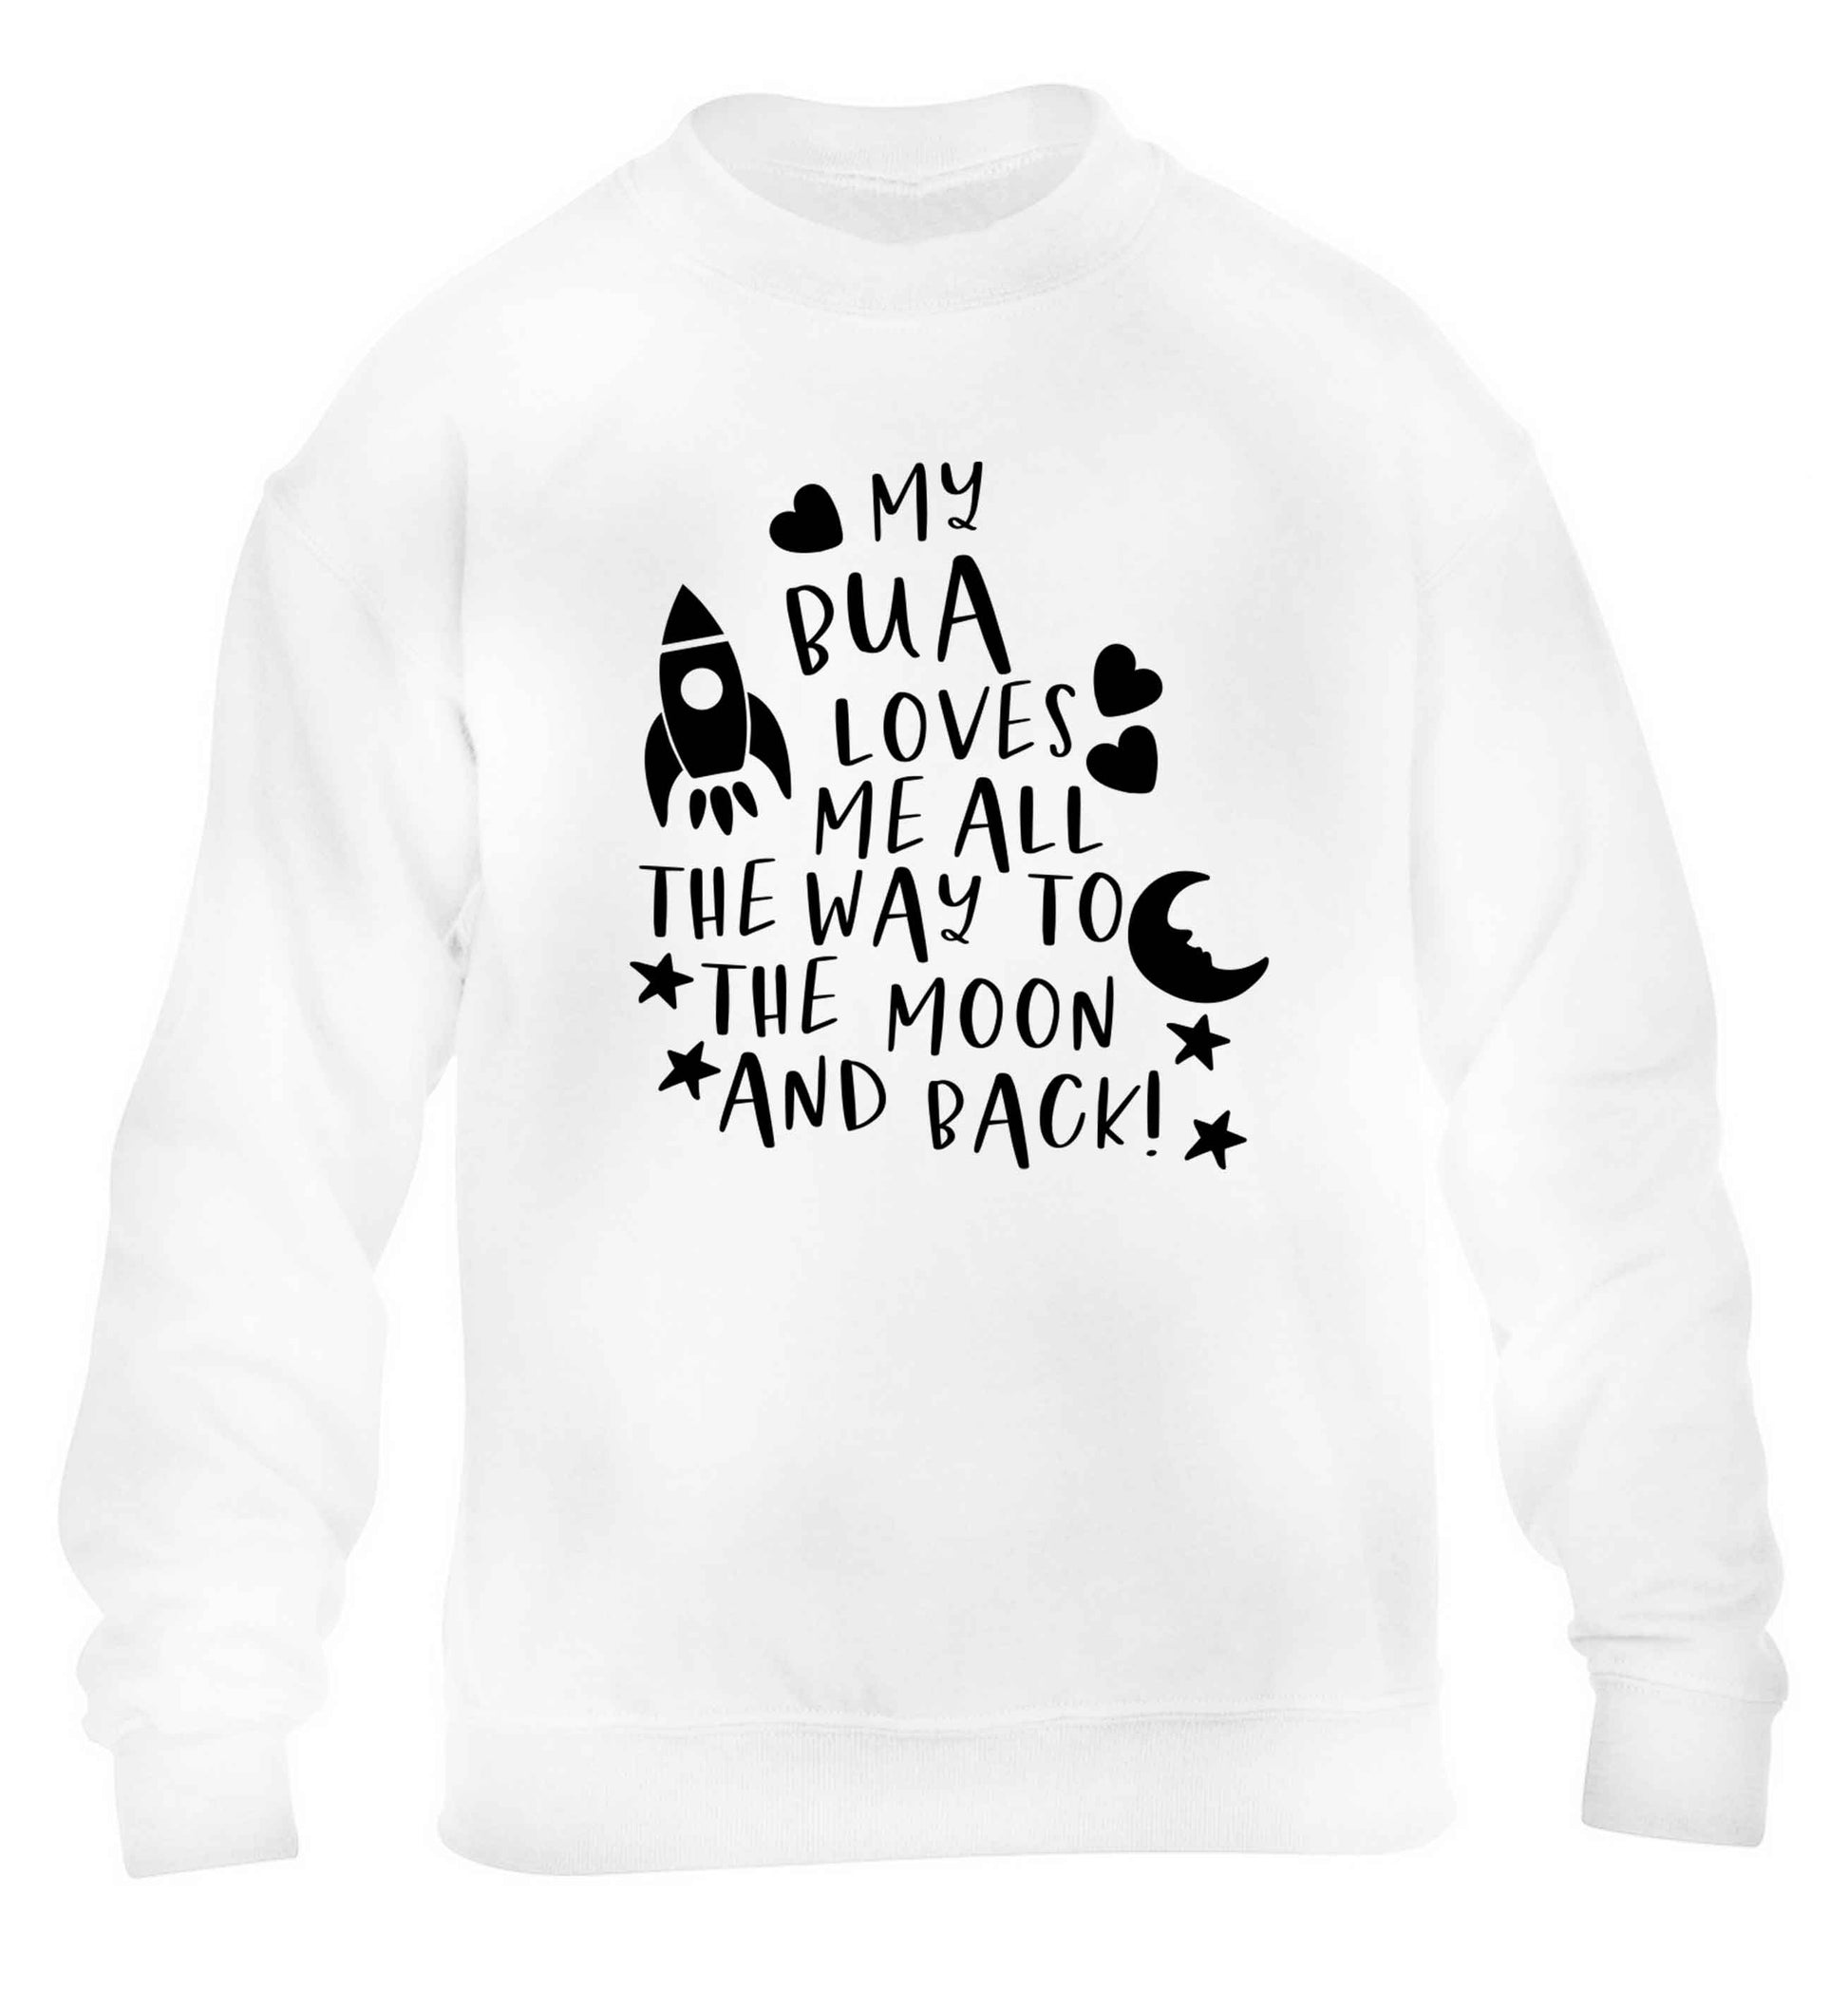 My bua loves me all they way to the moon and back children's white sweater 12-13 Years